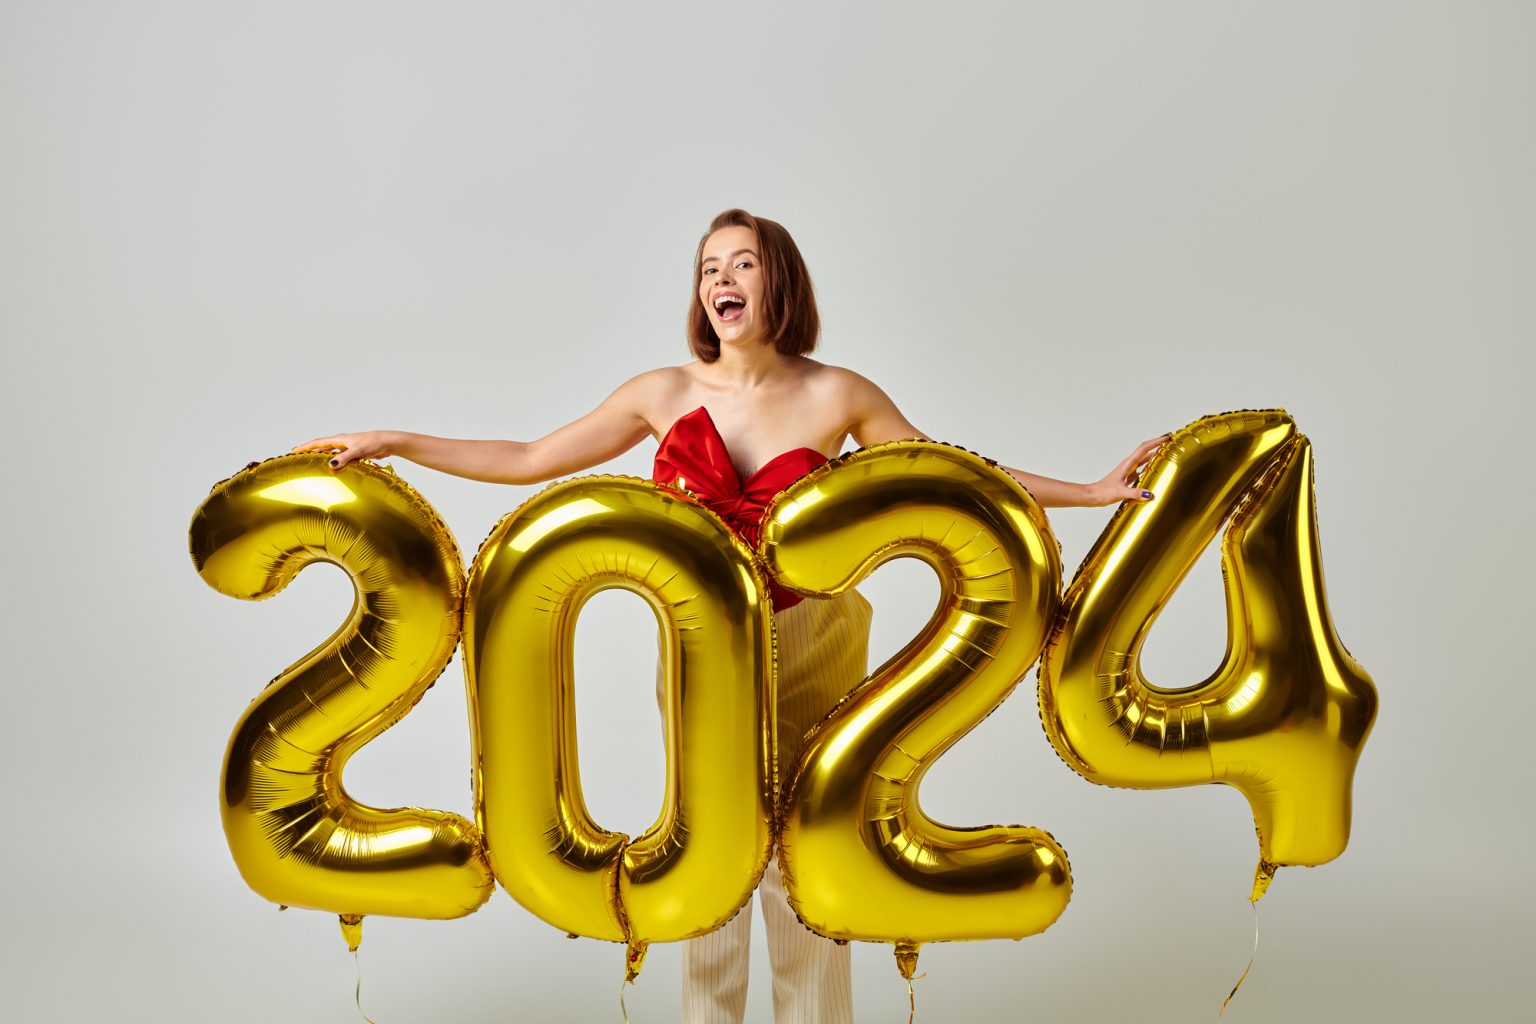 A photo of a woman holding golden balloons that spell out 2024